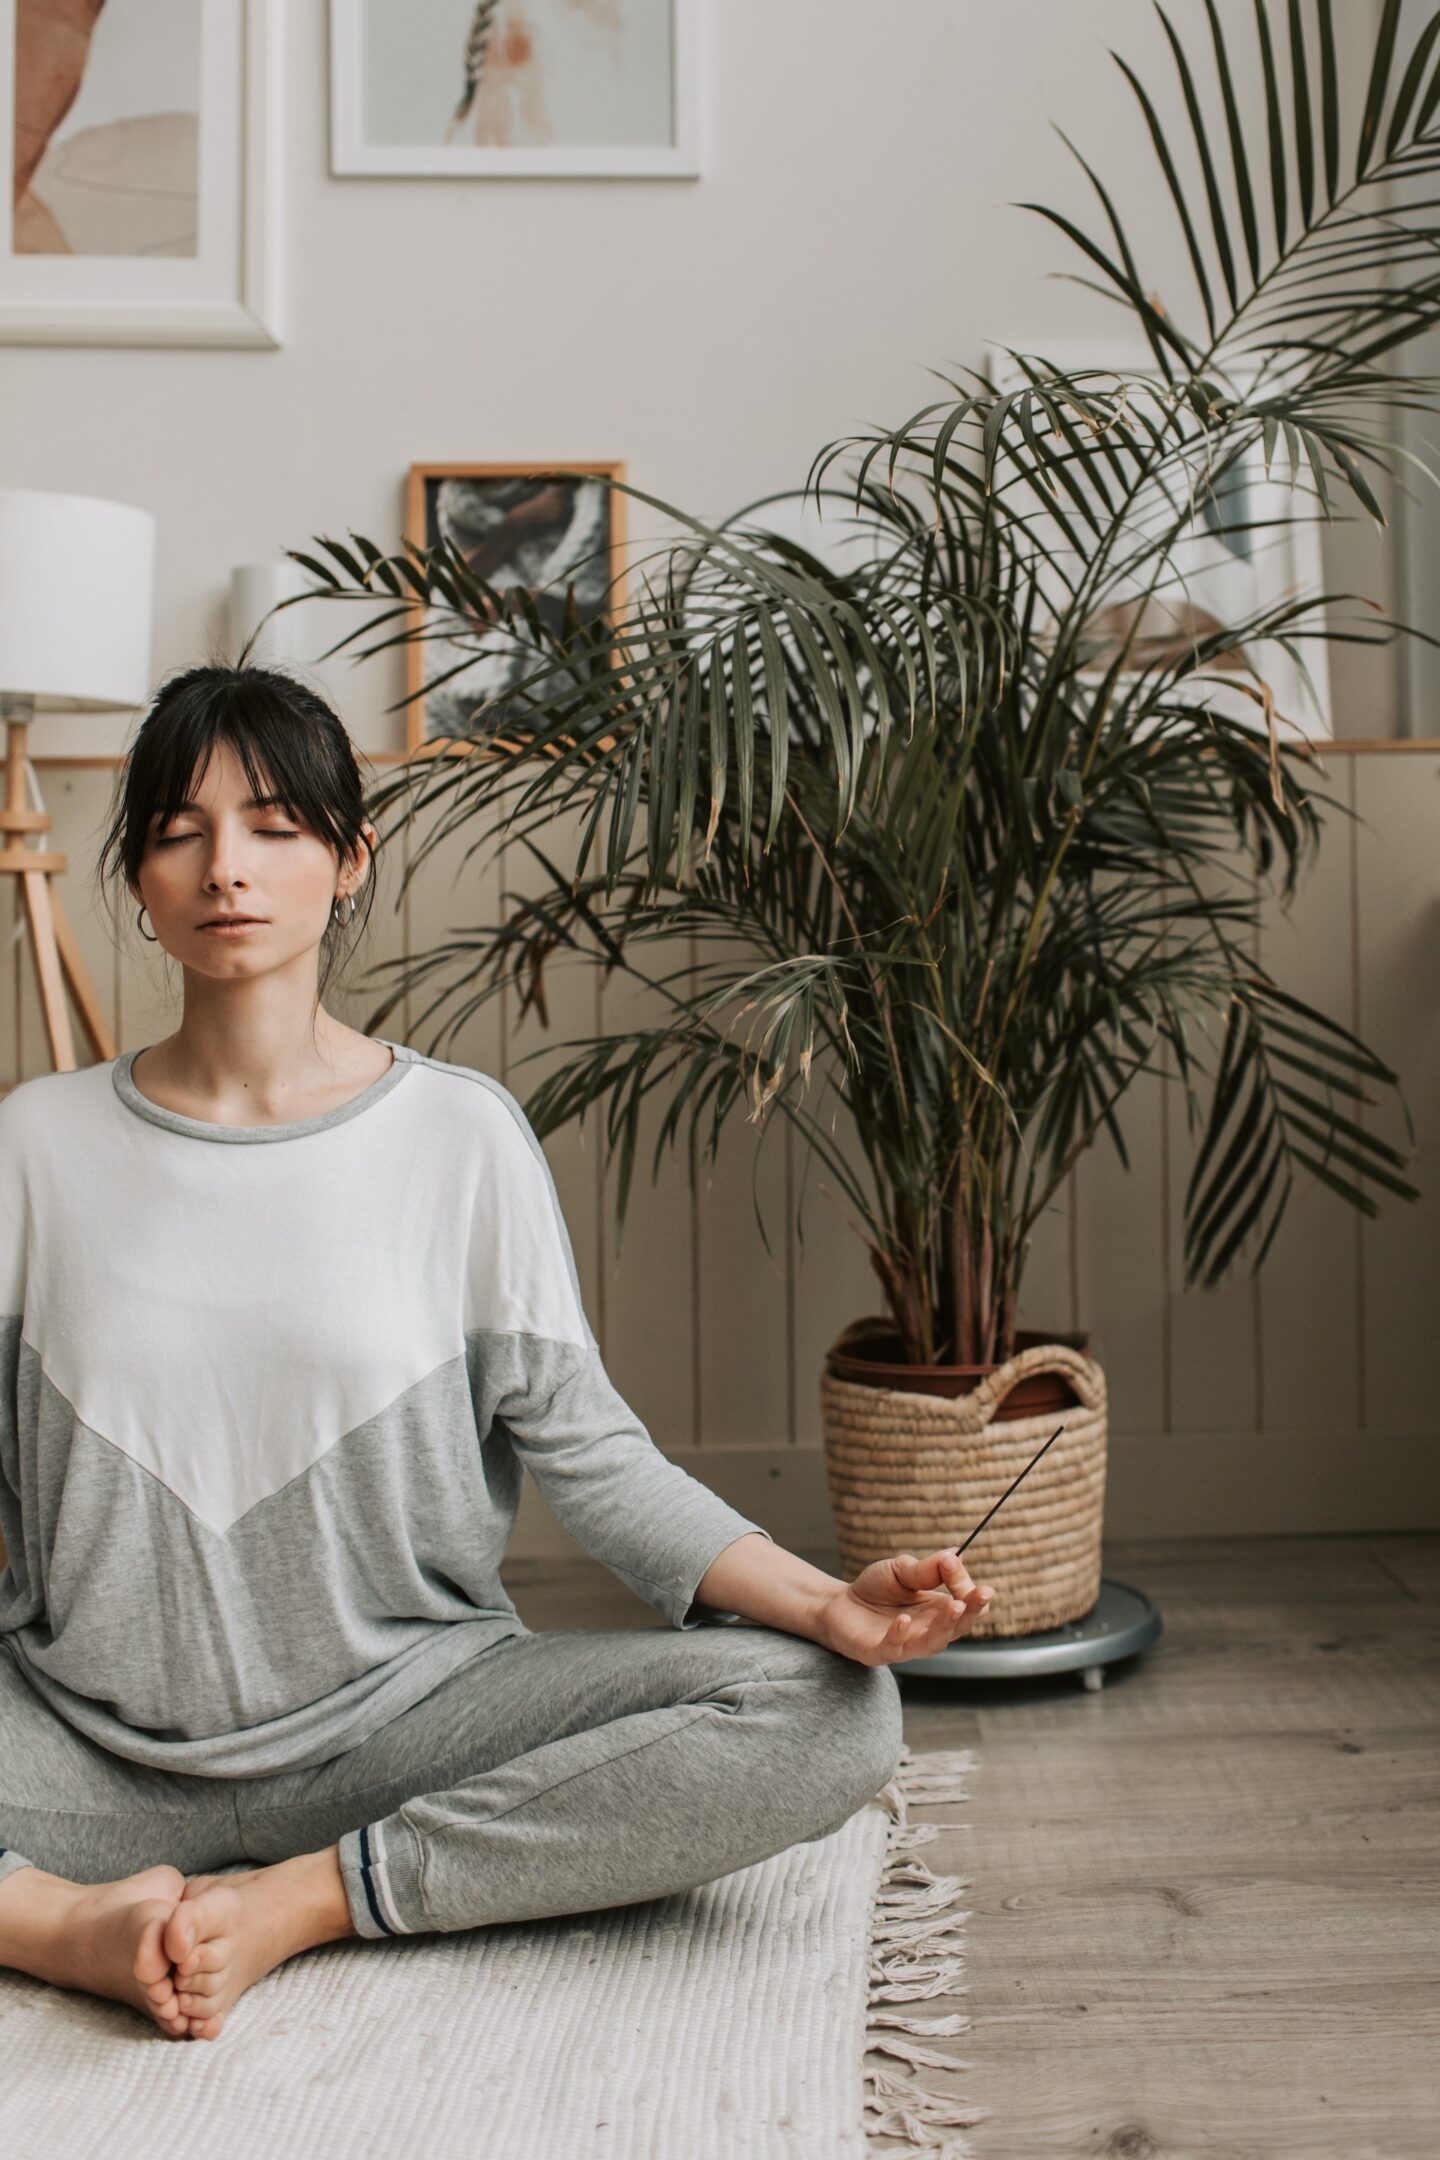 woman doing meditation with incense stick and house plants. 30 day challenge ideas. 30 days challenge ideas. 30 days challenge. challenges 30 days. month challenges. monthly challenges. monthly challenge. 30 daily challenges. month challenges.